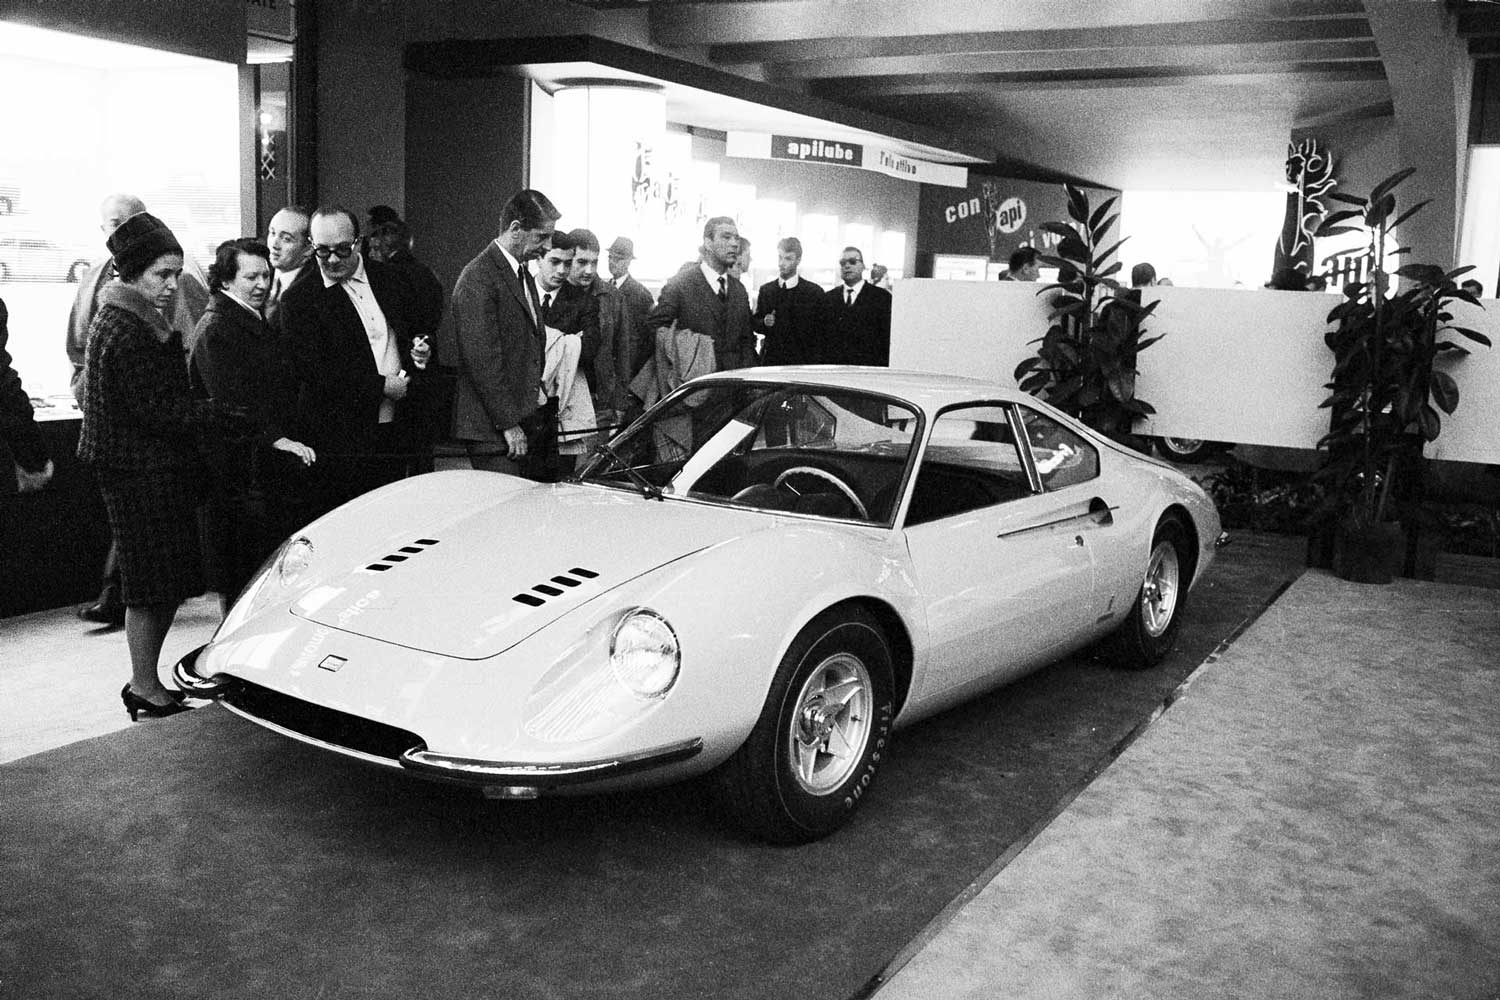 The motivation behind Hans Wilsdorf’s creation of Tudor bears remarkable parallels to Enzo Ferrari’s motivation to create Dino.